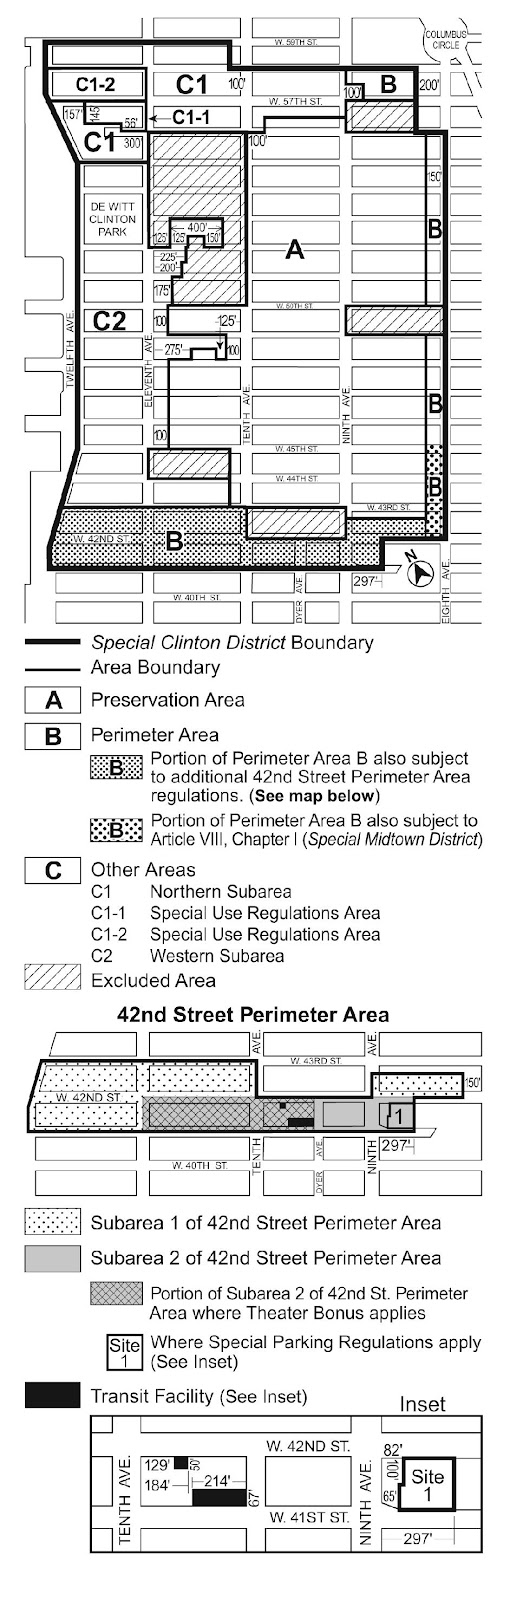 Zoning Resolutions Chapter 6: Special Clinton District Appendix A - Special Clinton District Map.0